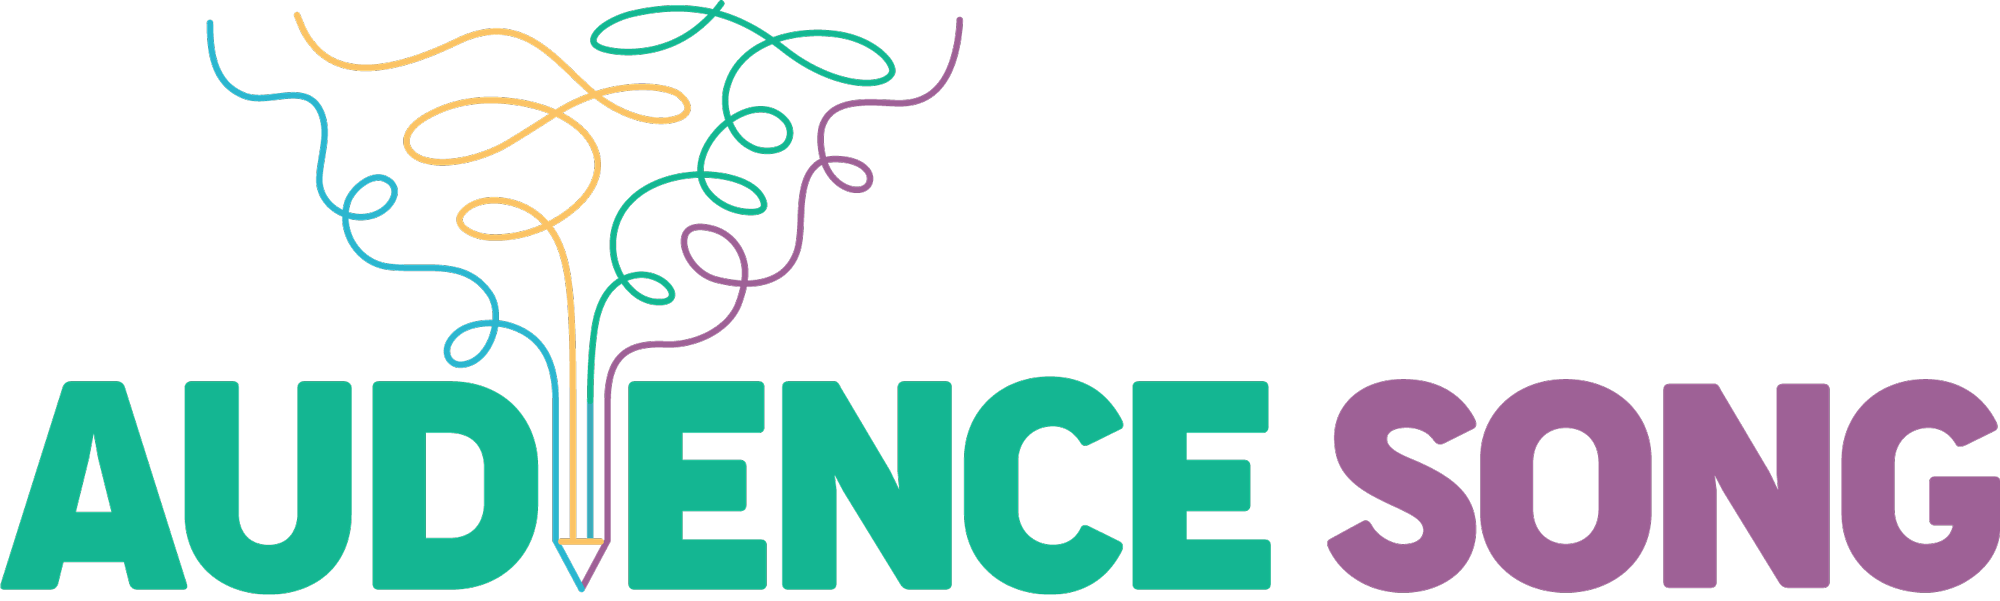 Audience Song Logo